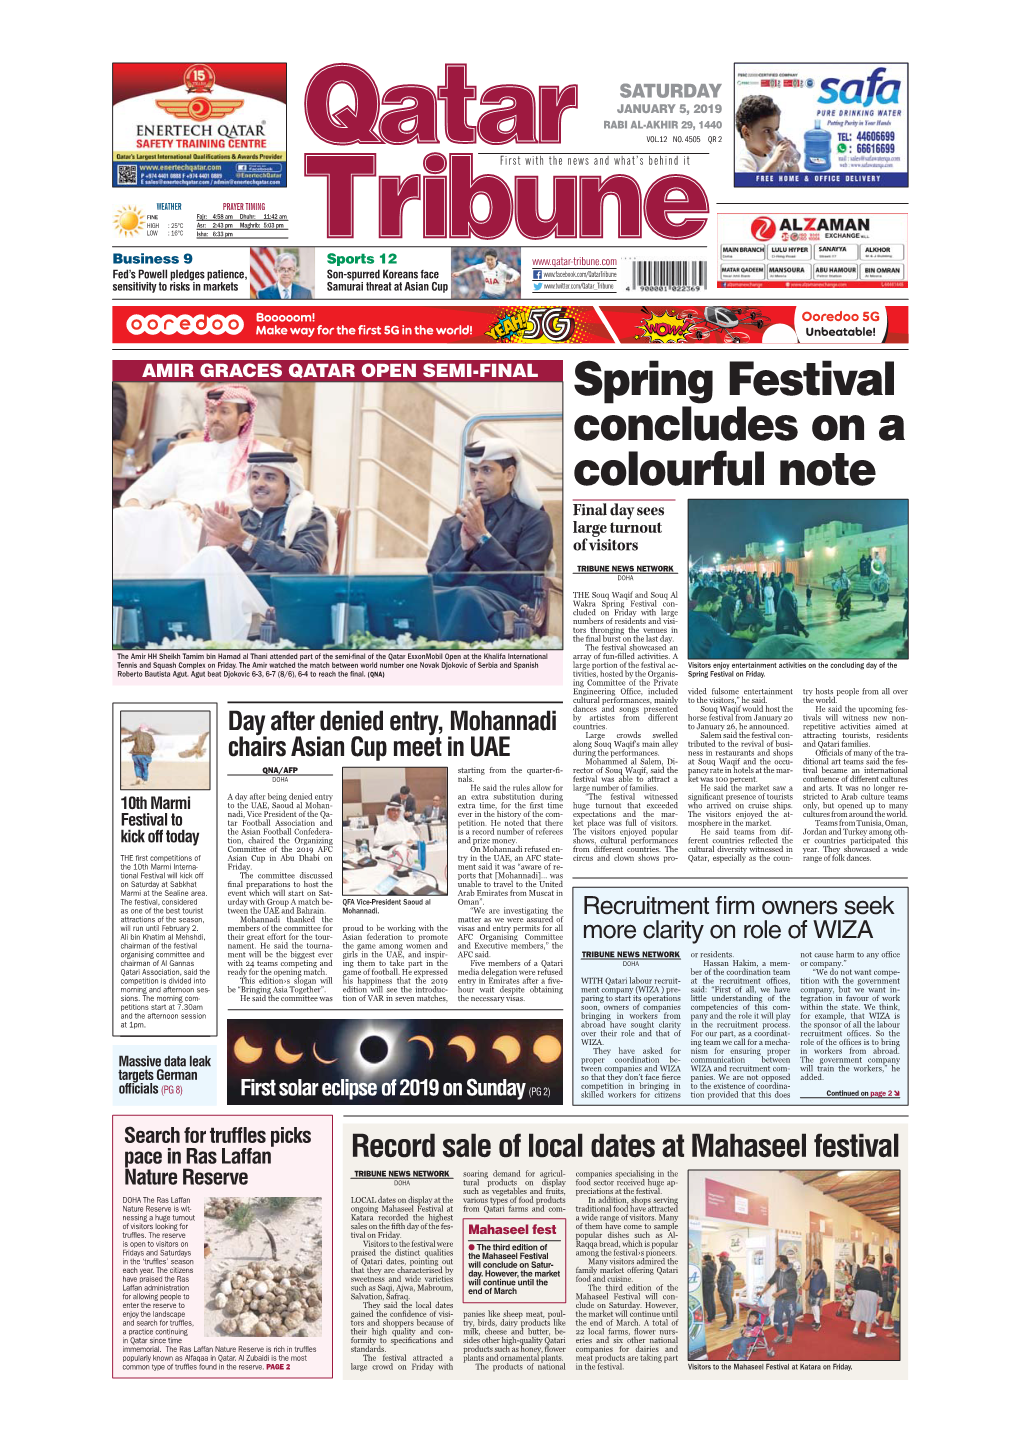 Spring Festival Concludes on a Colourful Note Final Day Sees Large Turnout of Visitors